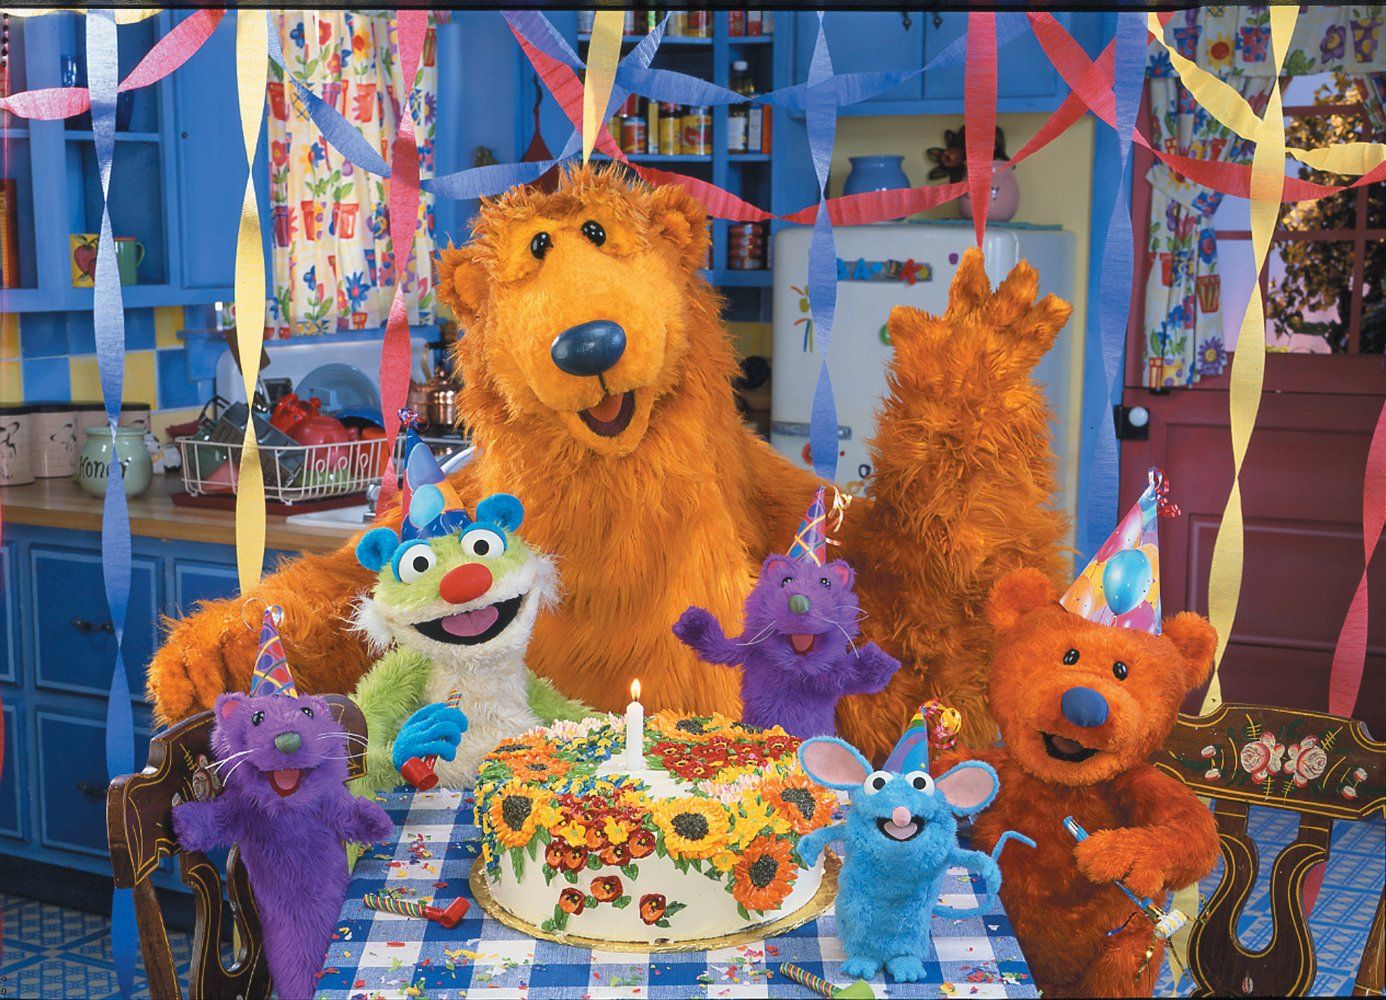 This Is What the Man Who Played in the Blue House Looks Like Today - Meet MacNeal, the Man Behind Bear In the Big Blue House